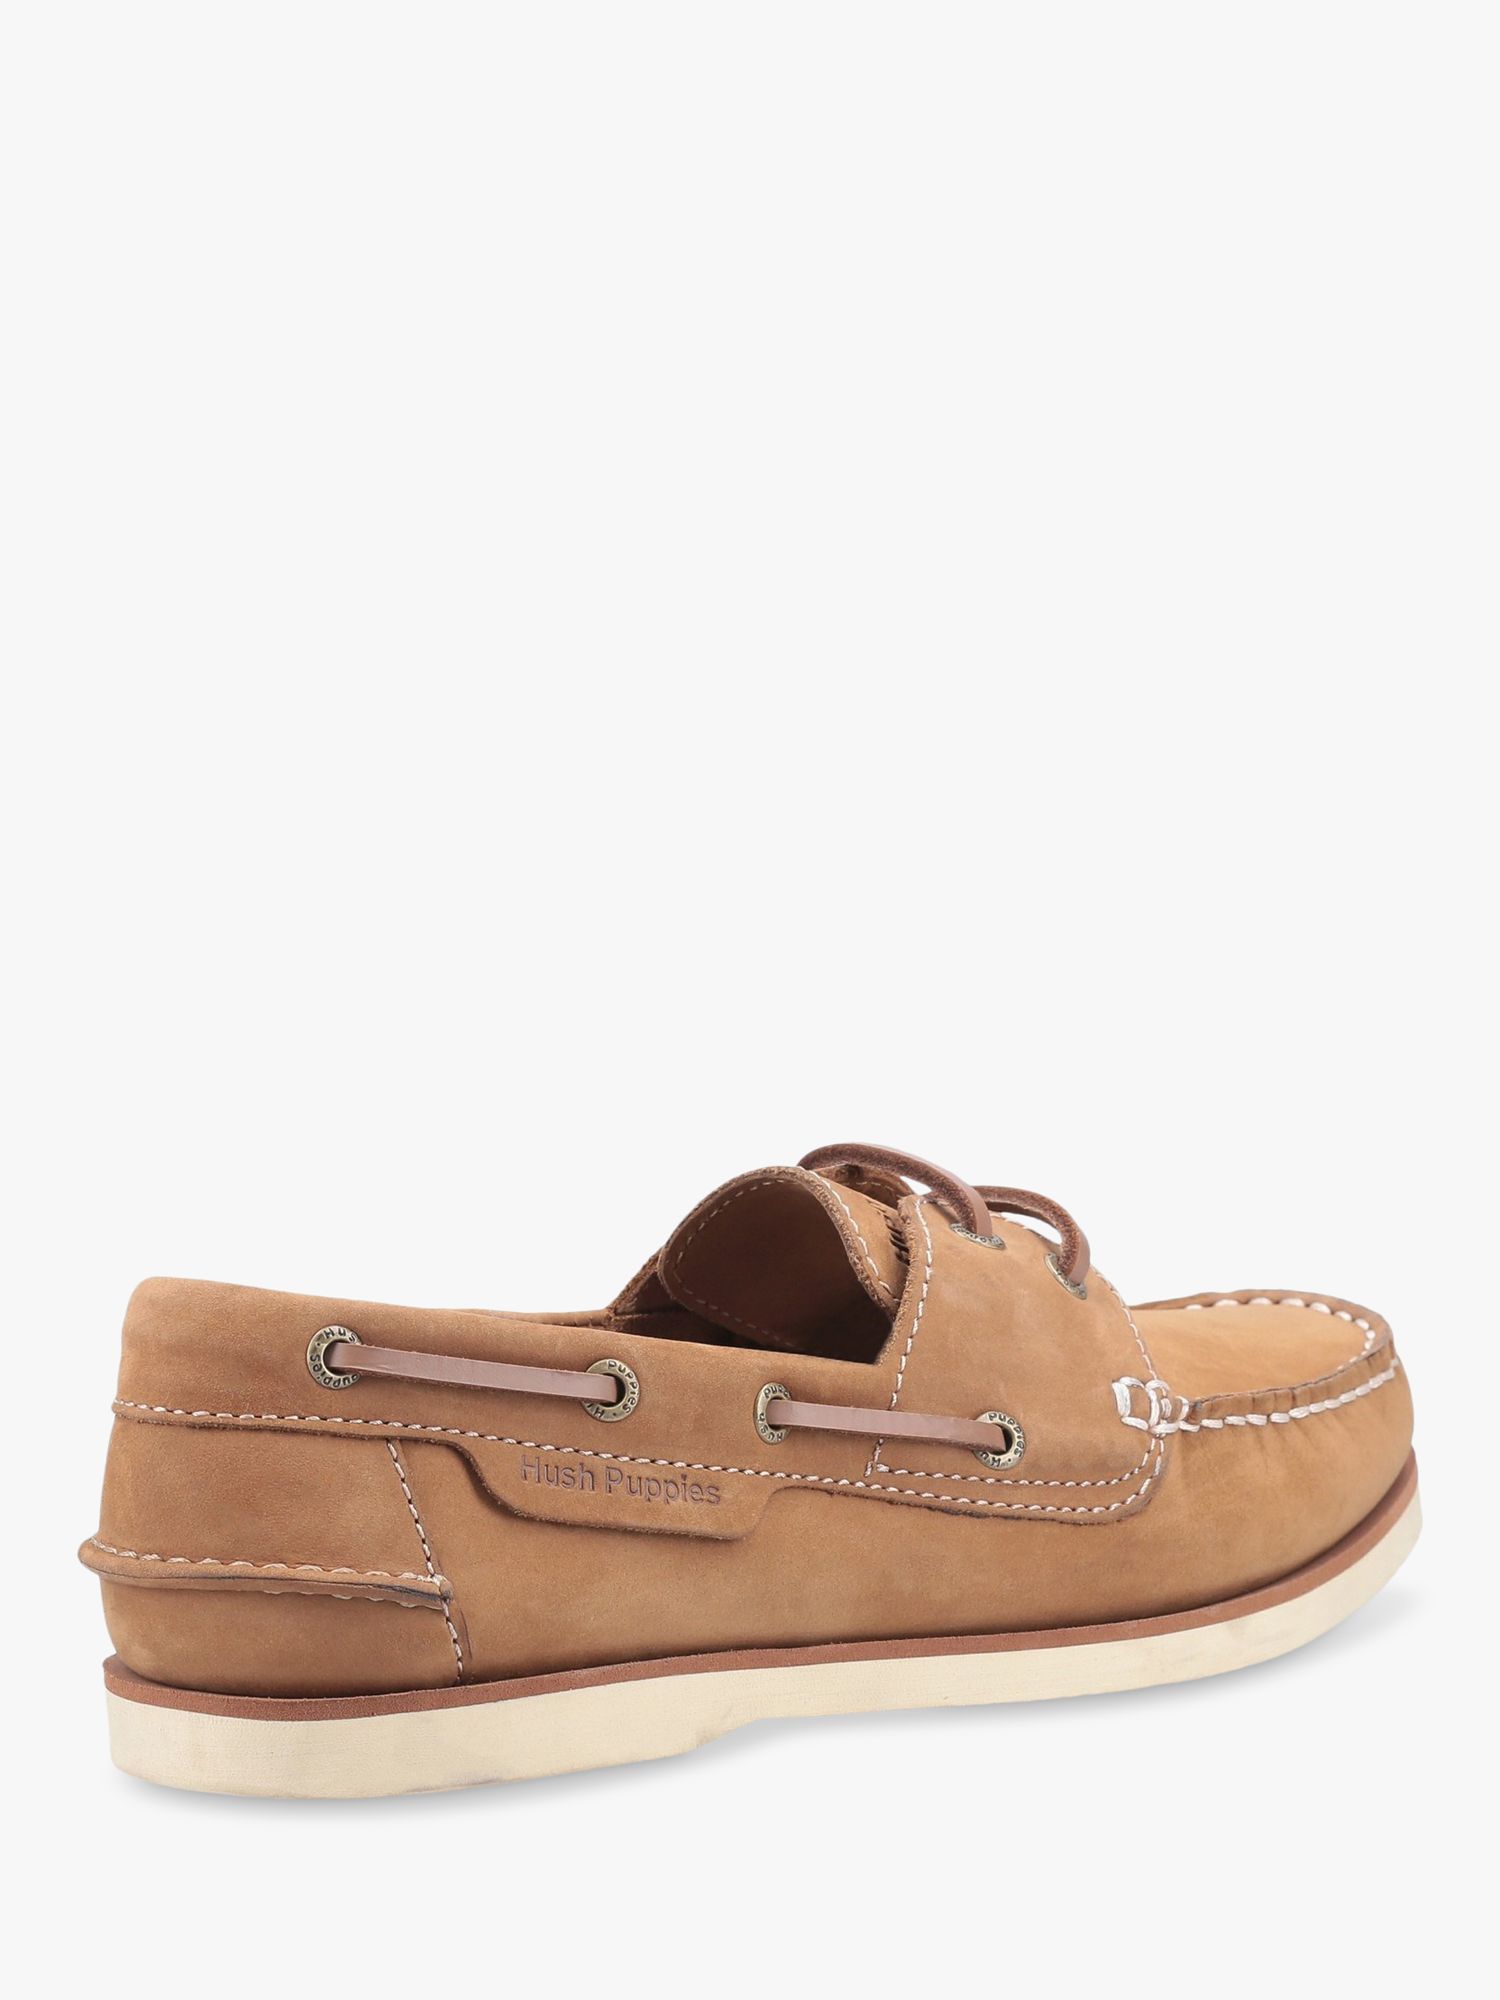 Hush Puppies Henry Leather Boat Shoe, Chesnut at John Lewis & Partners